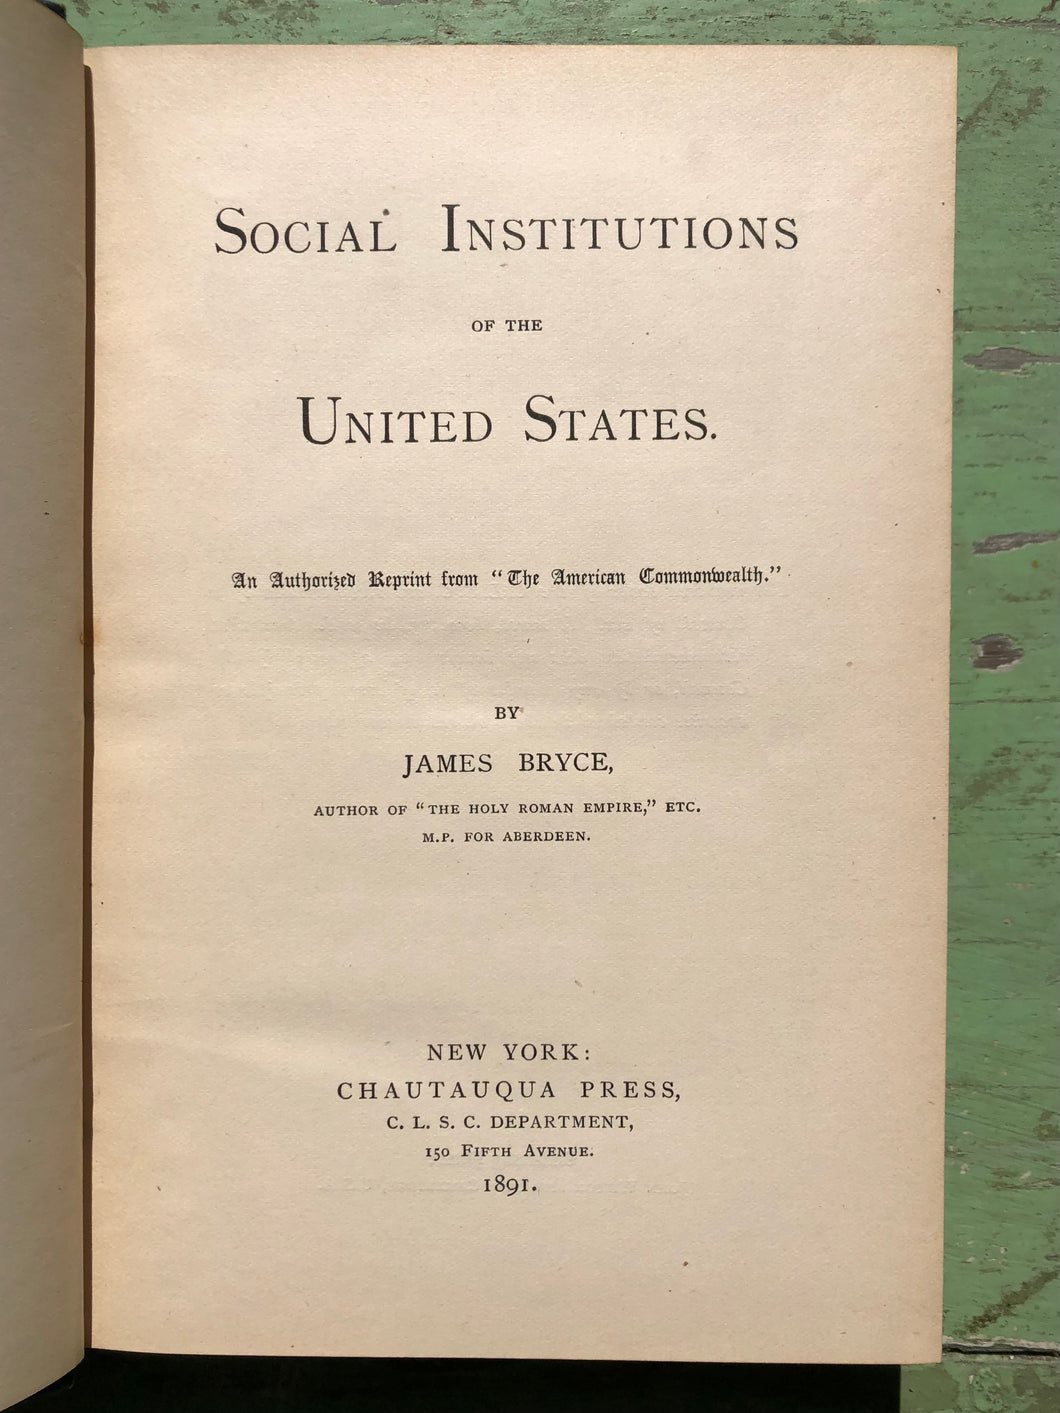 Social Institutions of the United States. by James Bryce